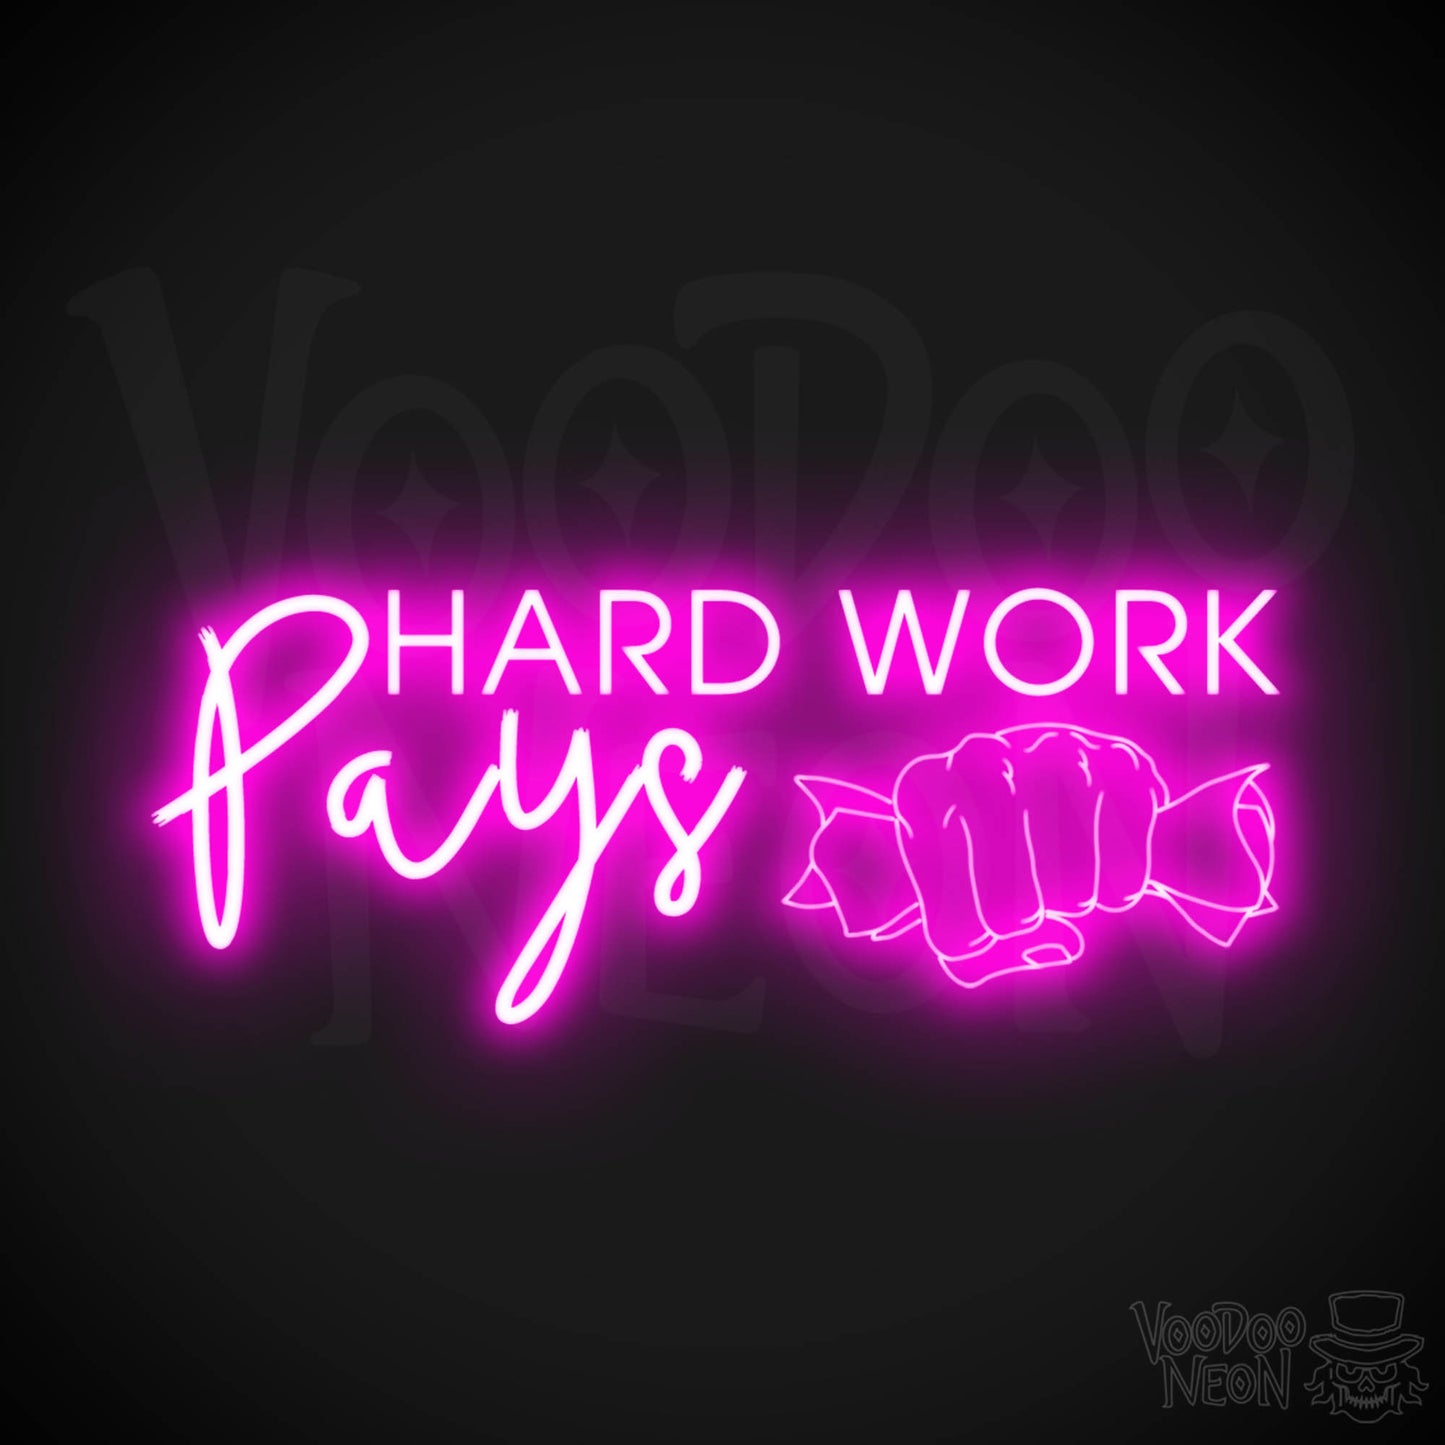 Hard Work Pays Neon Sign - LED Neon Wall Art - Color Pink